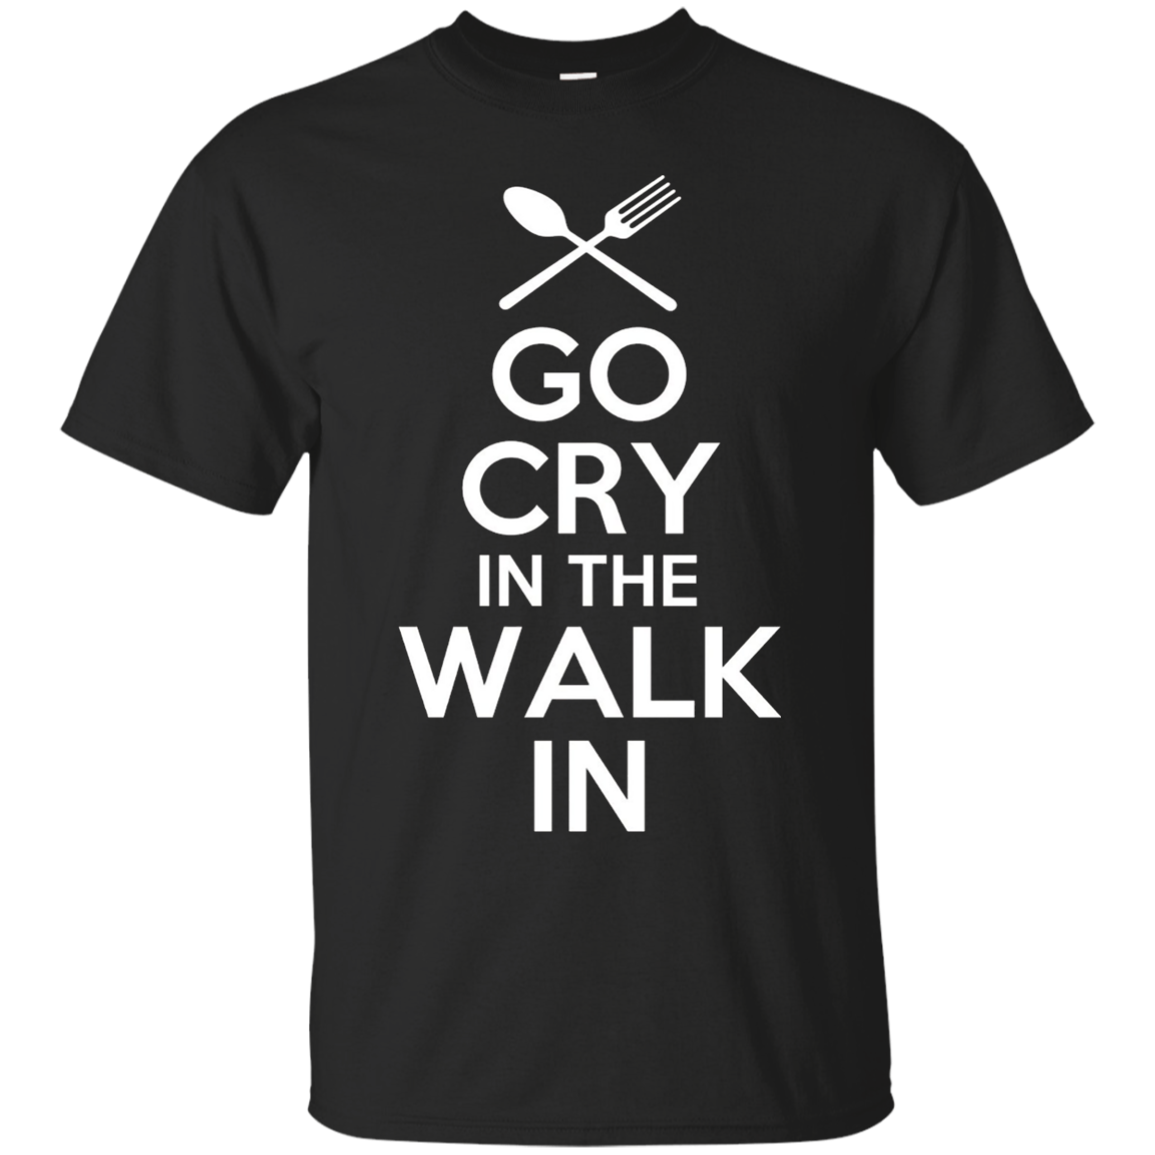 Go Cry in the Walk in Shirt Funny Chef T-Shirt Cooking Tee